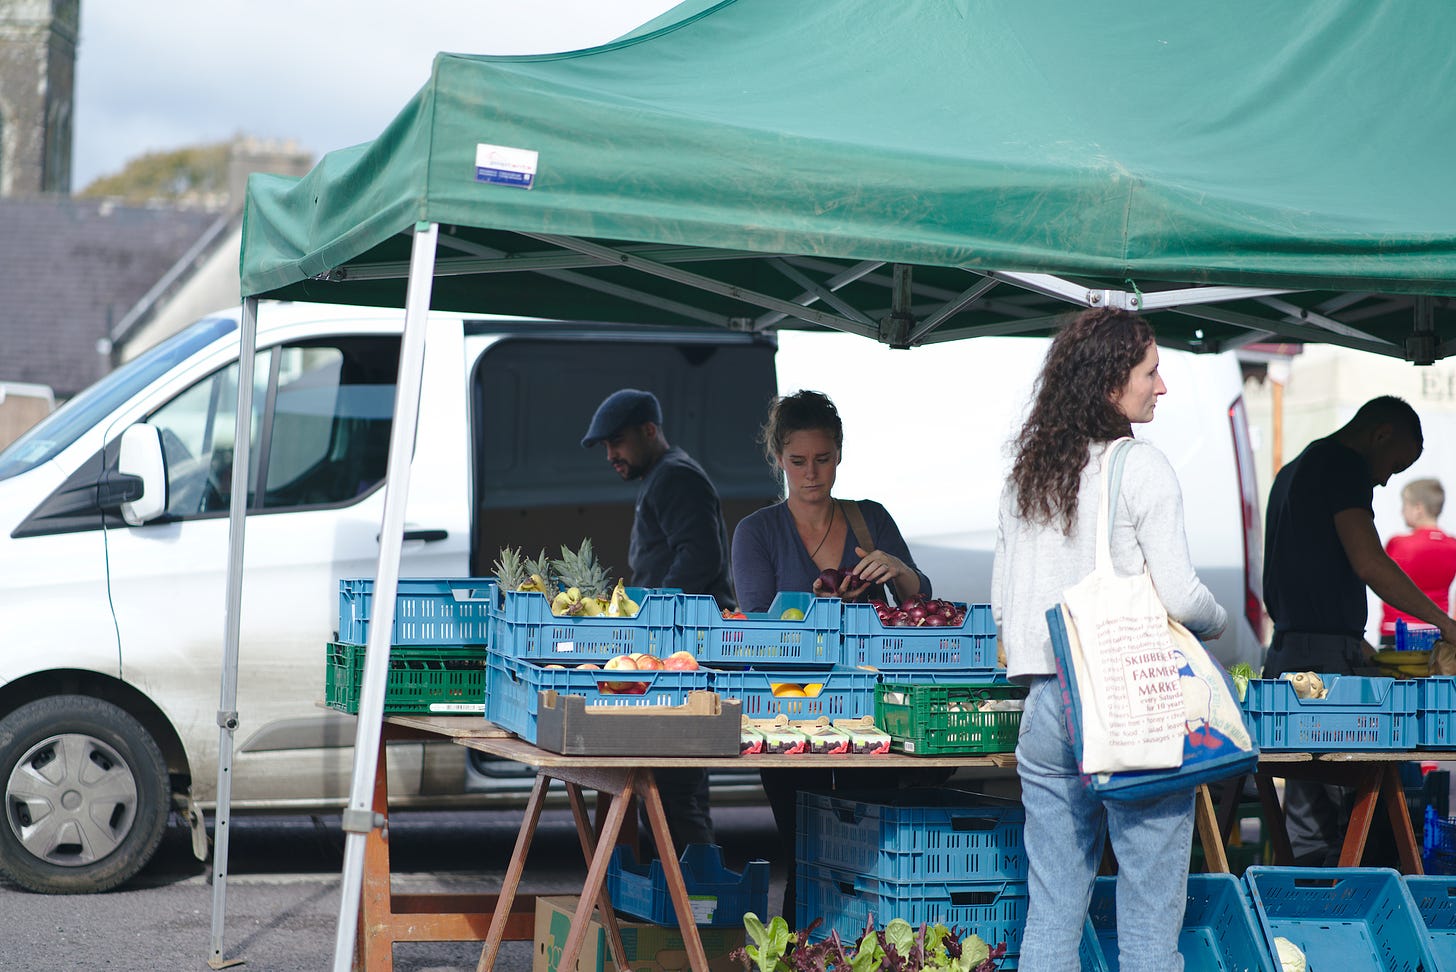 The Ancient Organics Farm stand selling local, organic, and sustainably grown produce at Skibbereen Farmers Market.